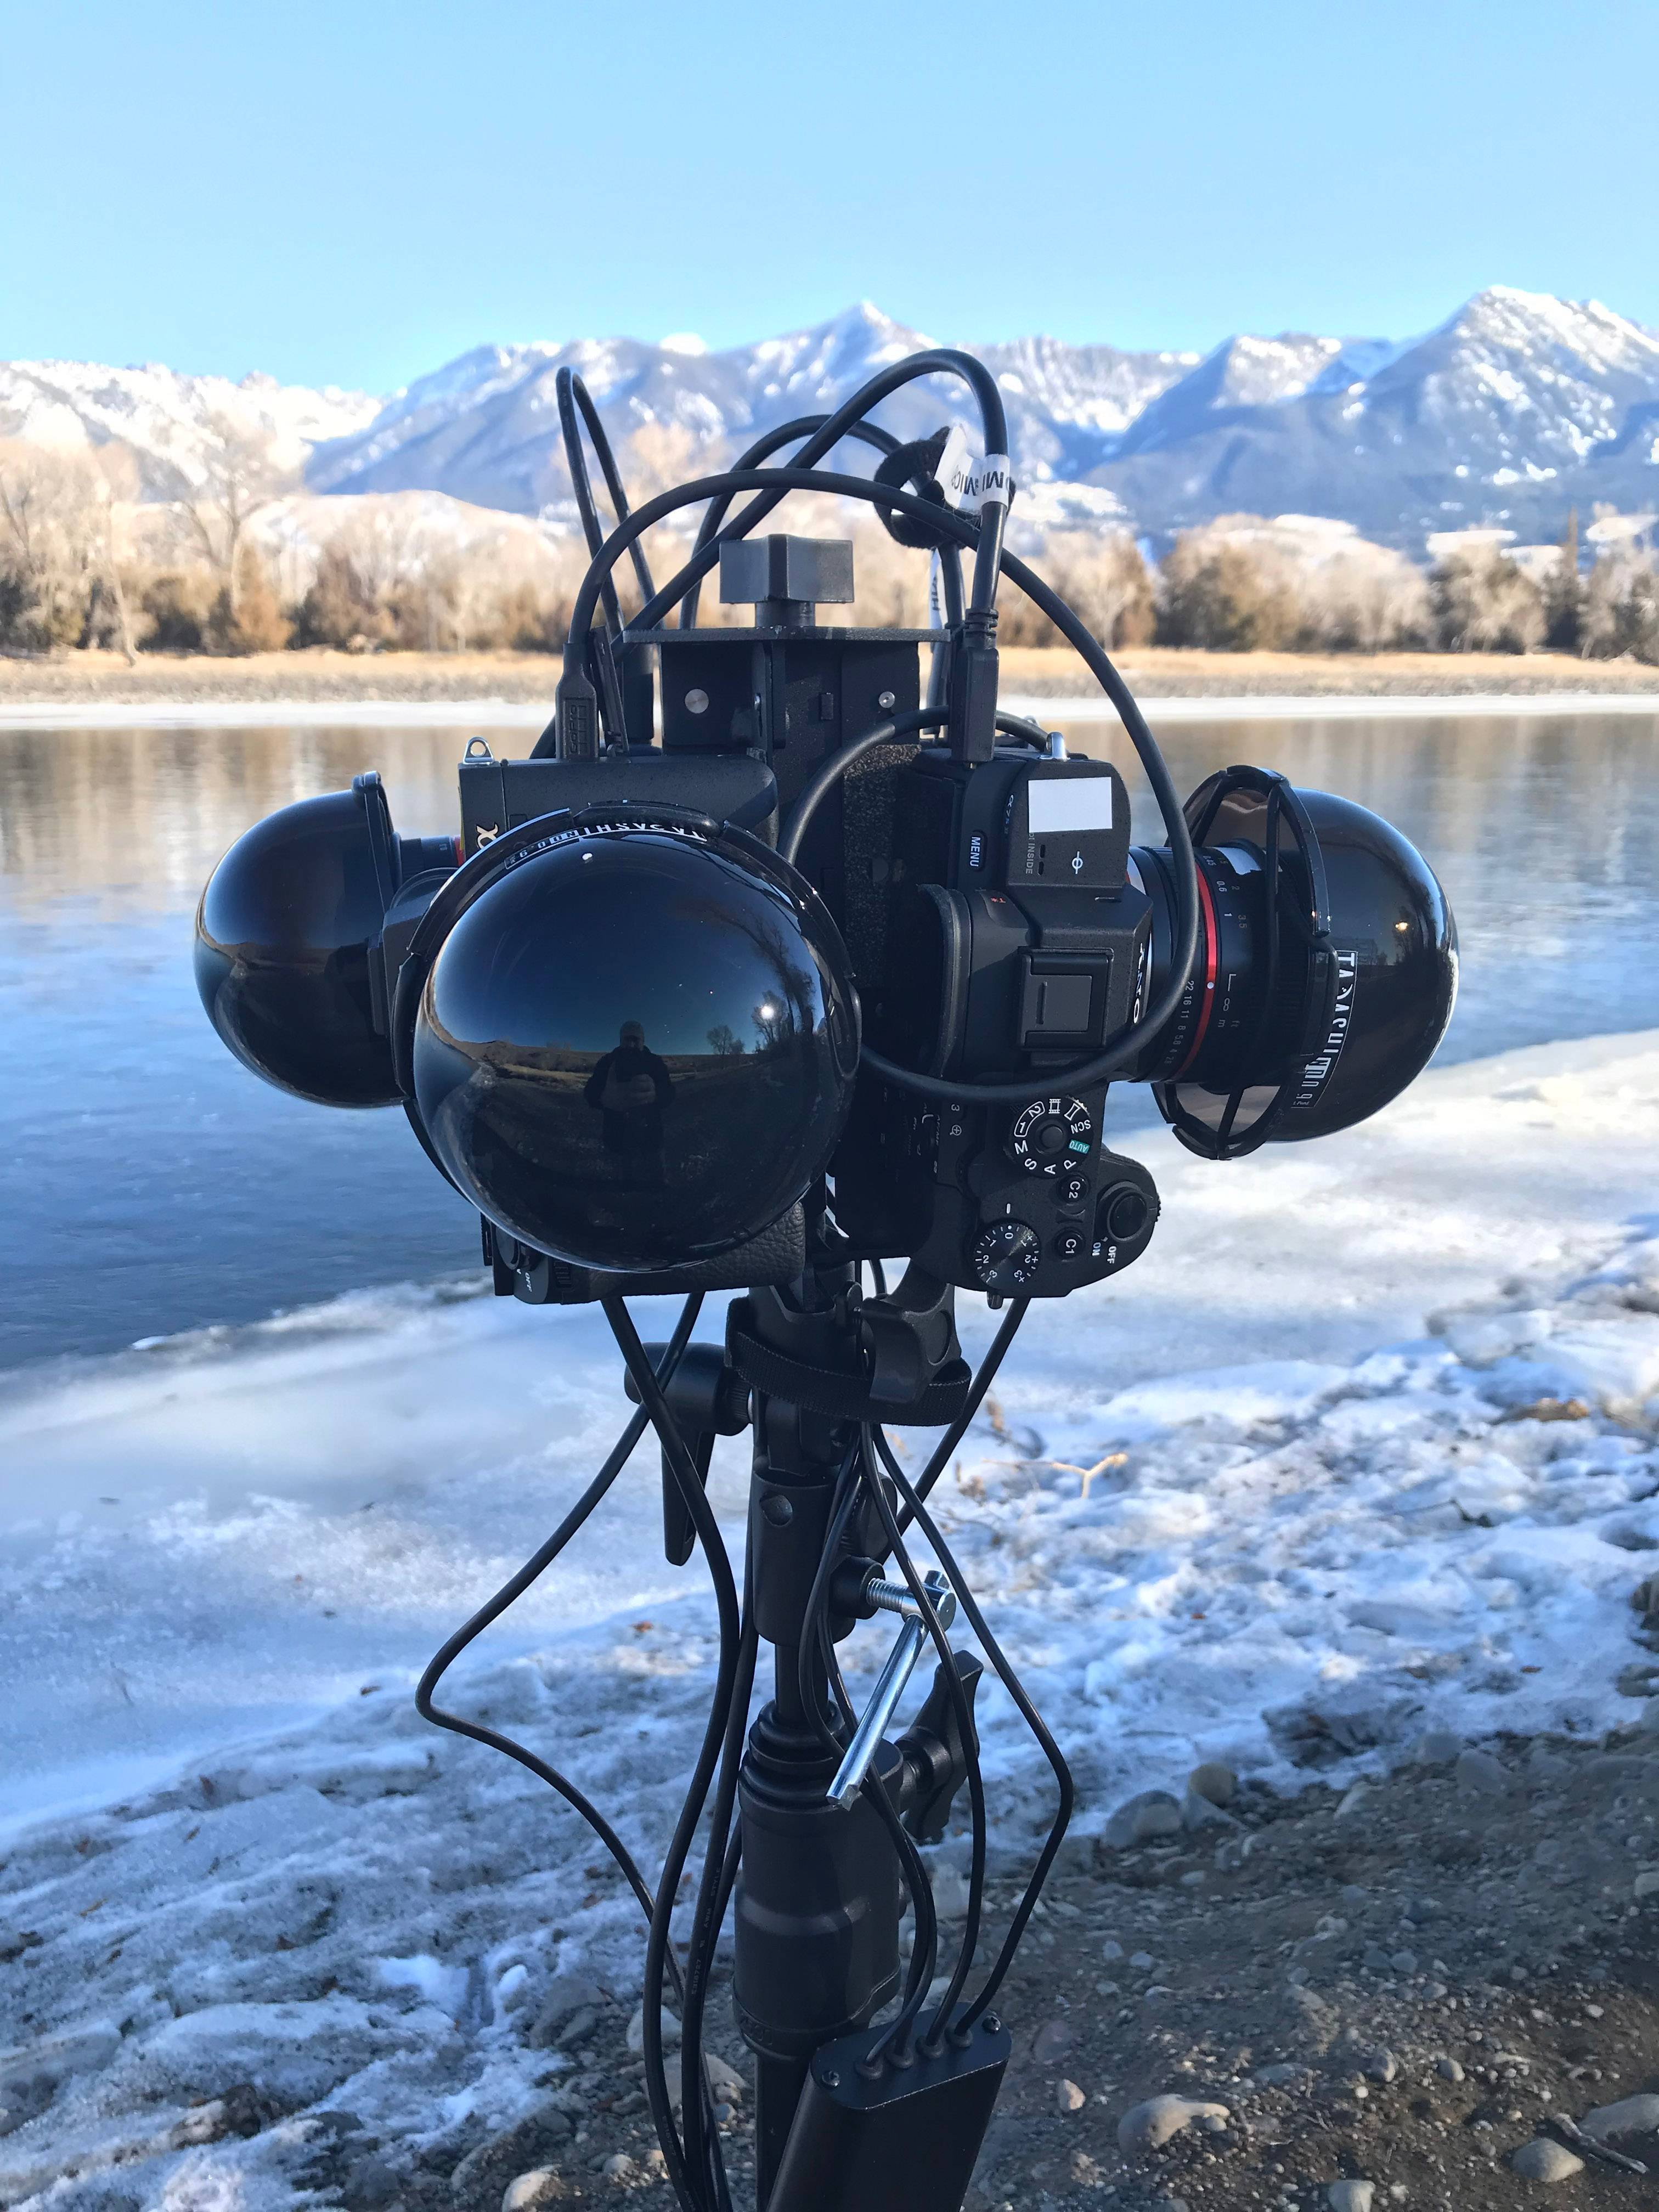 360-degree camera rig by a river with mountains in the background